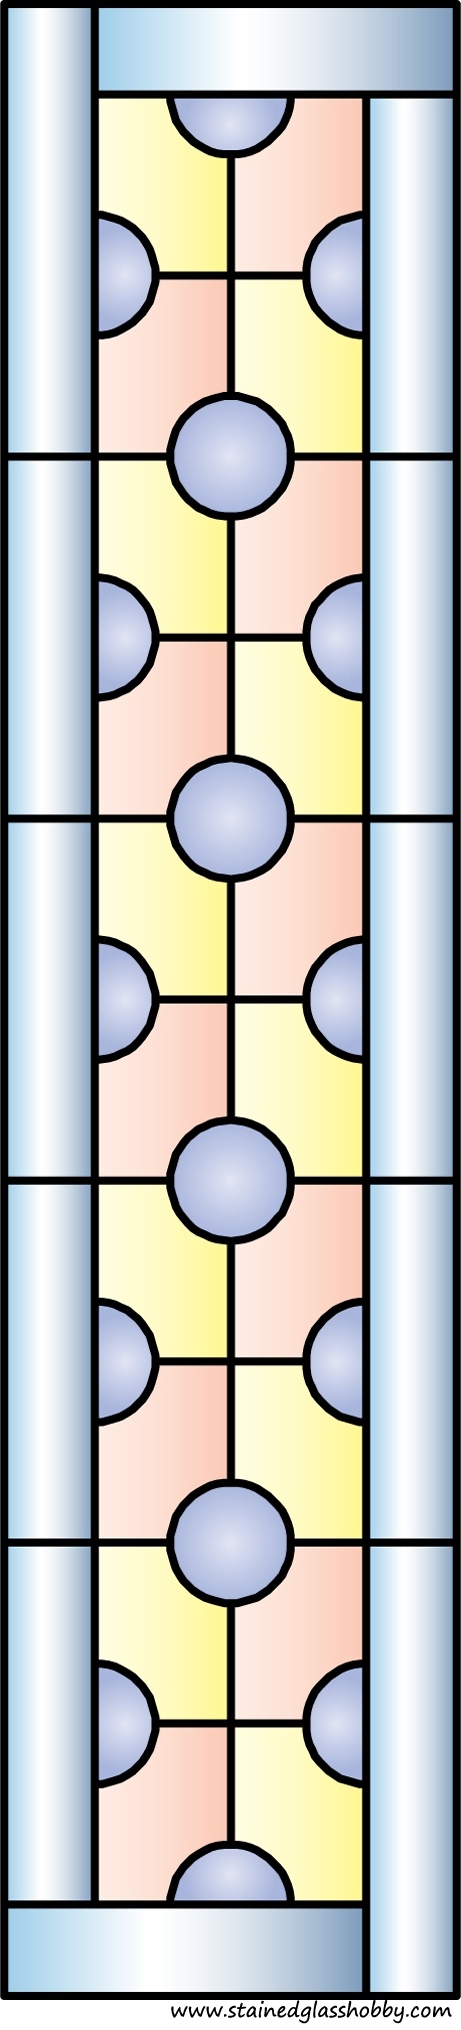 Rectangular panel for stained glass design 6